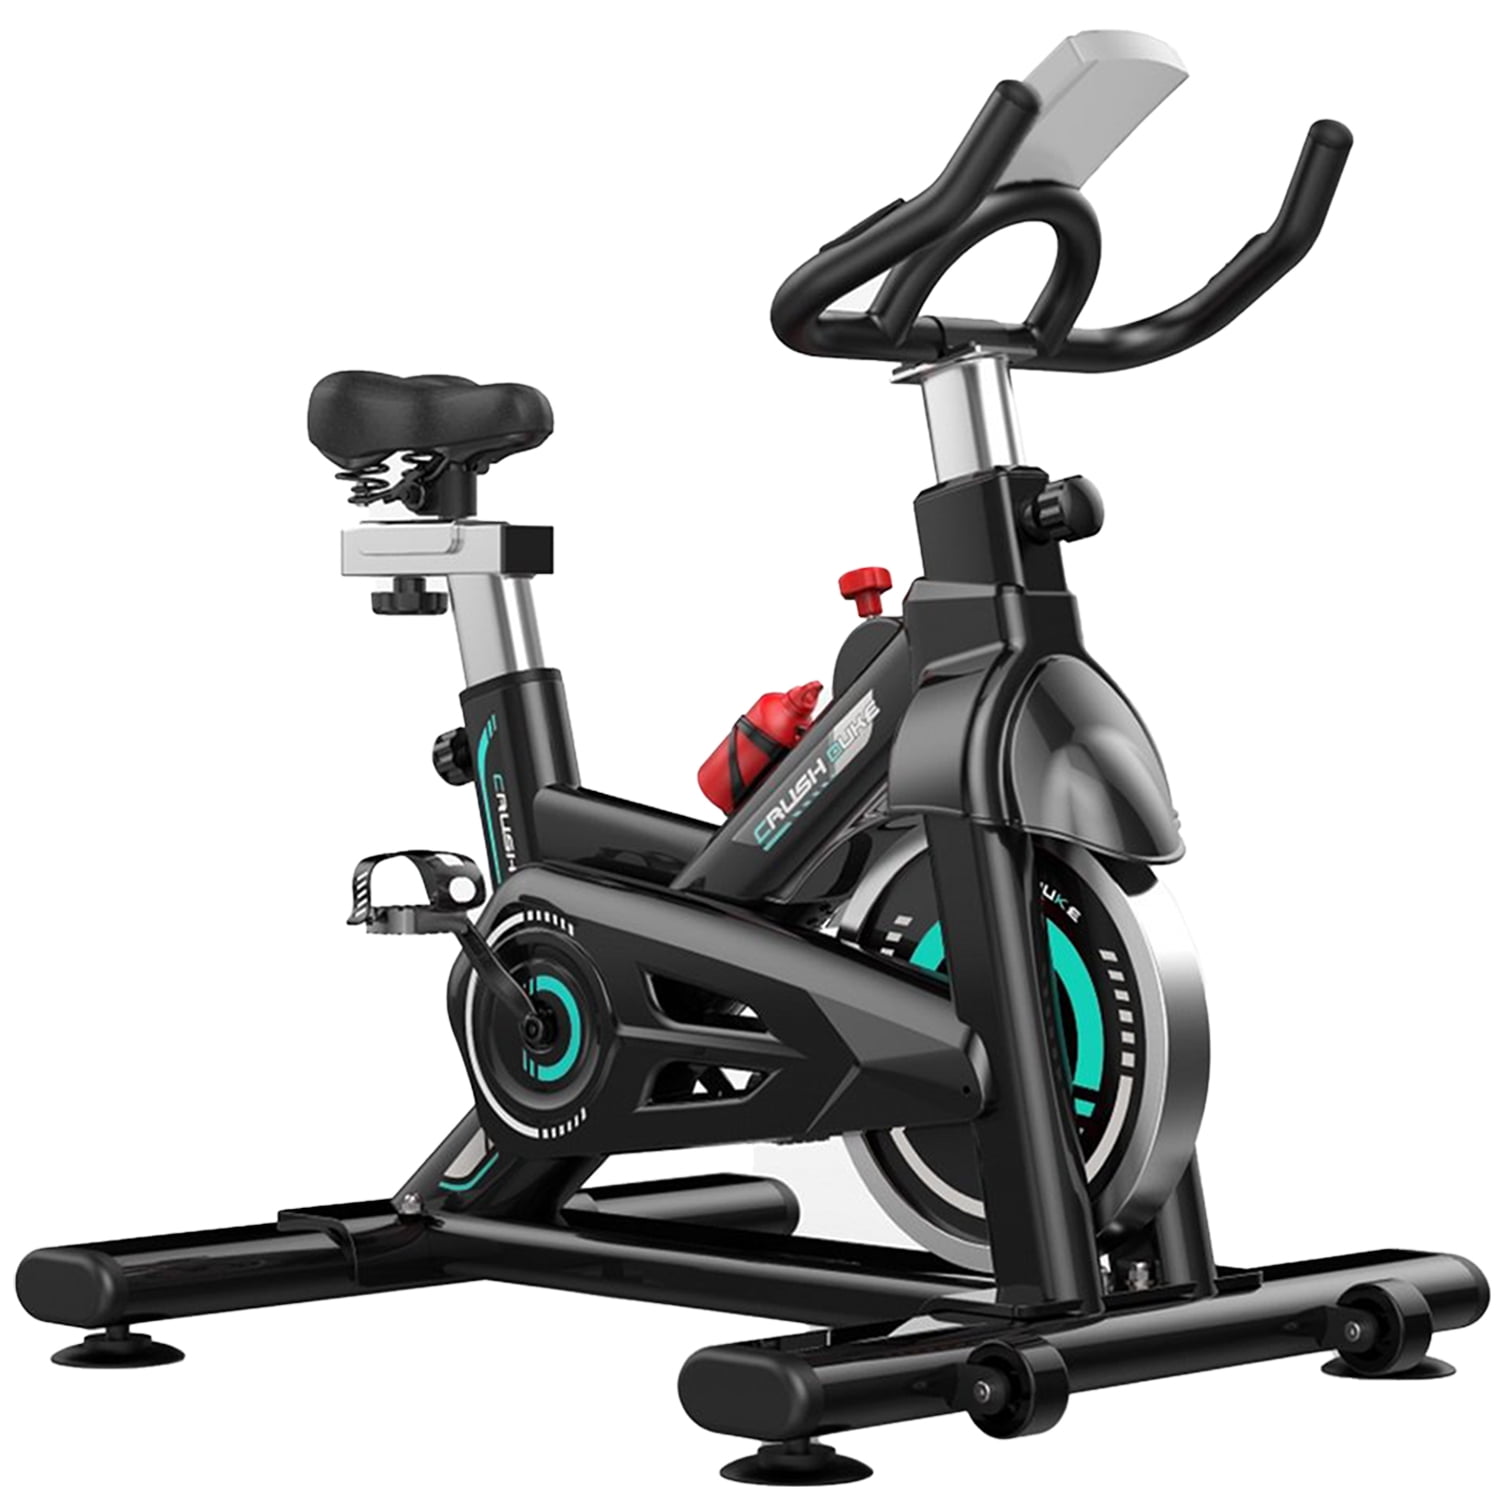 Costway Bicycle Cycling Exercise Bike Adjustable Gym Fitness Cardio Workout Home 